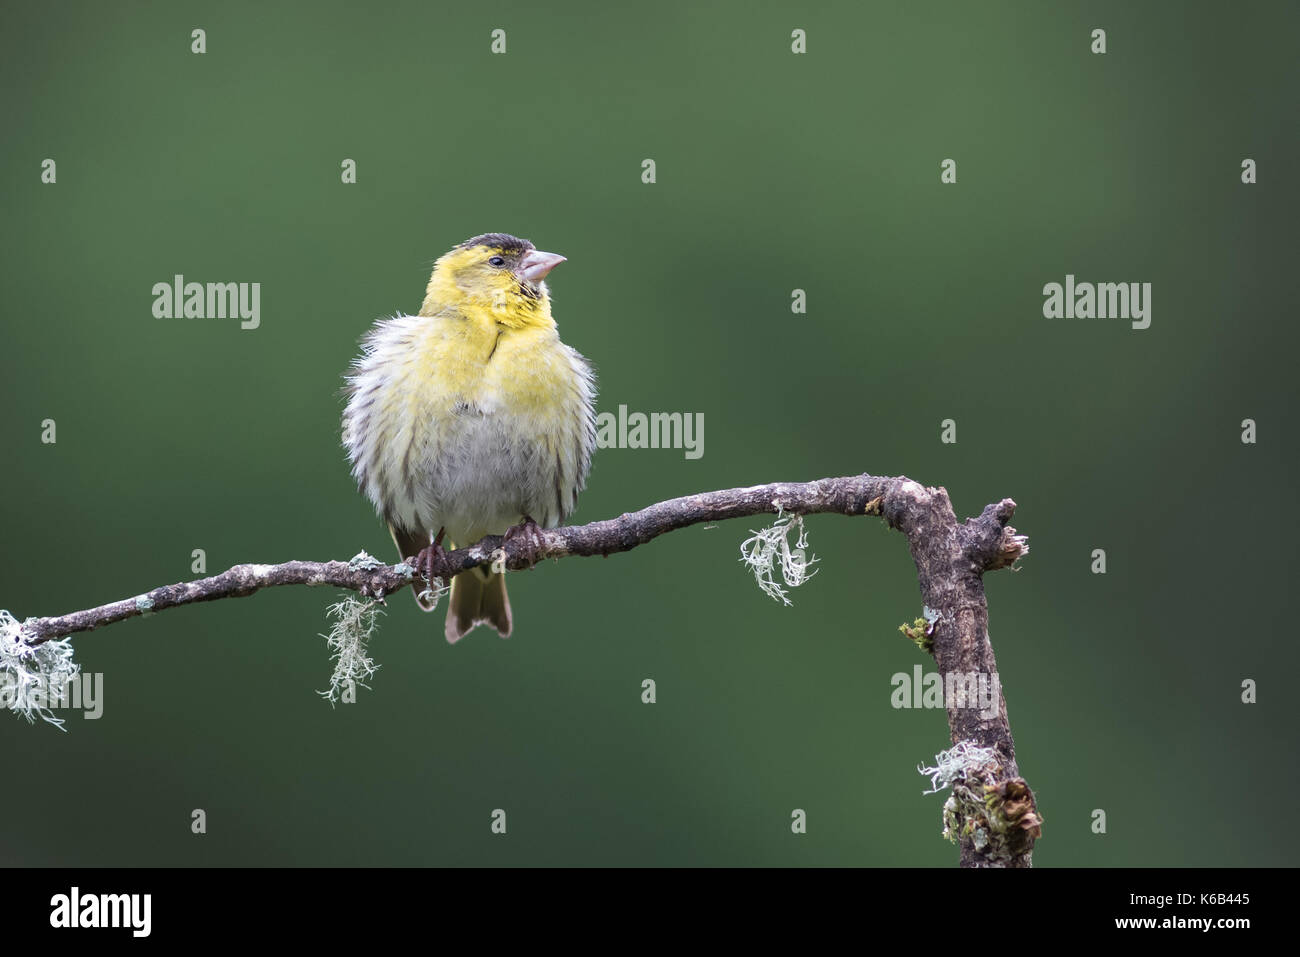 A juvenile female siskin with fluffled out ruffled feathers perched on a branch looking alert to the right with space for text Stock Photo